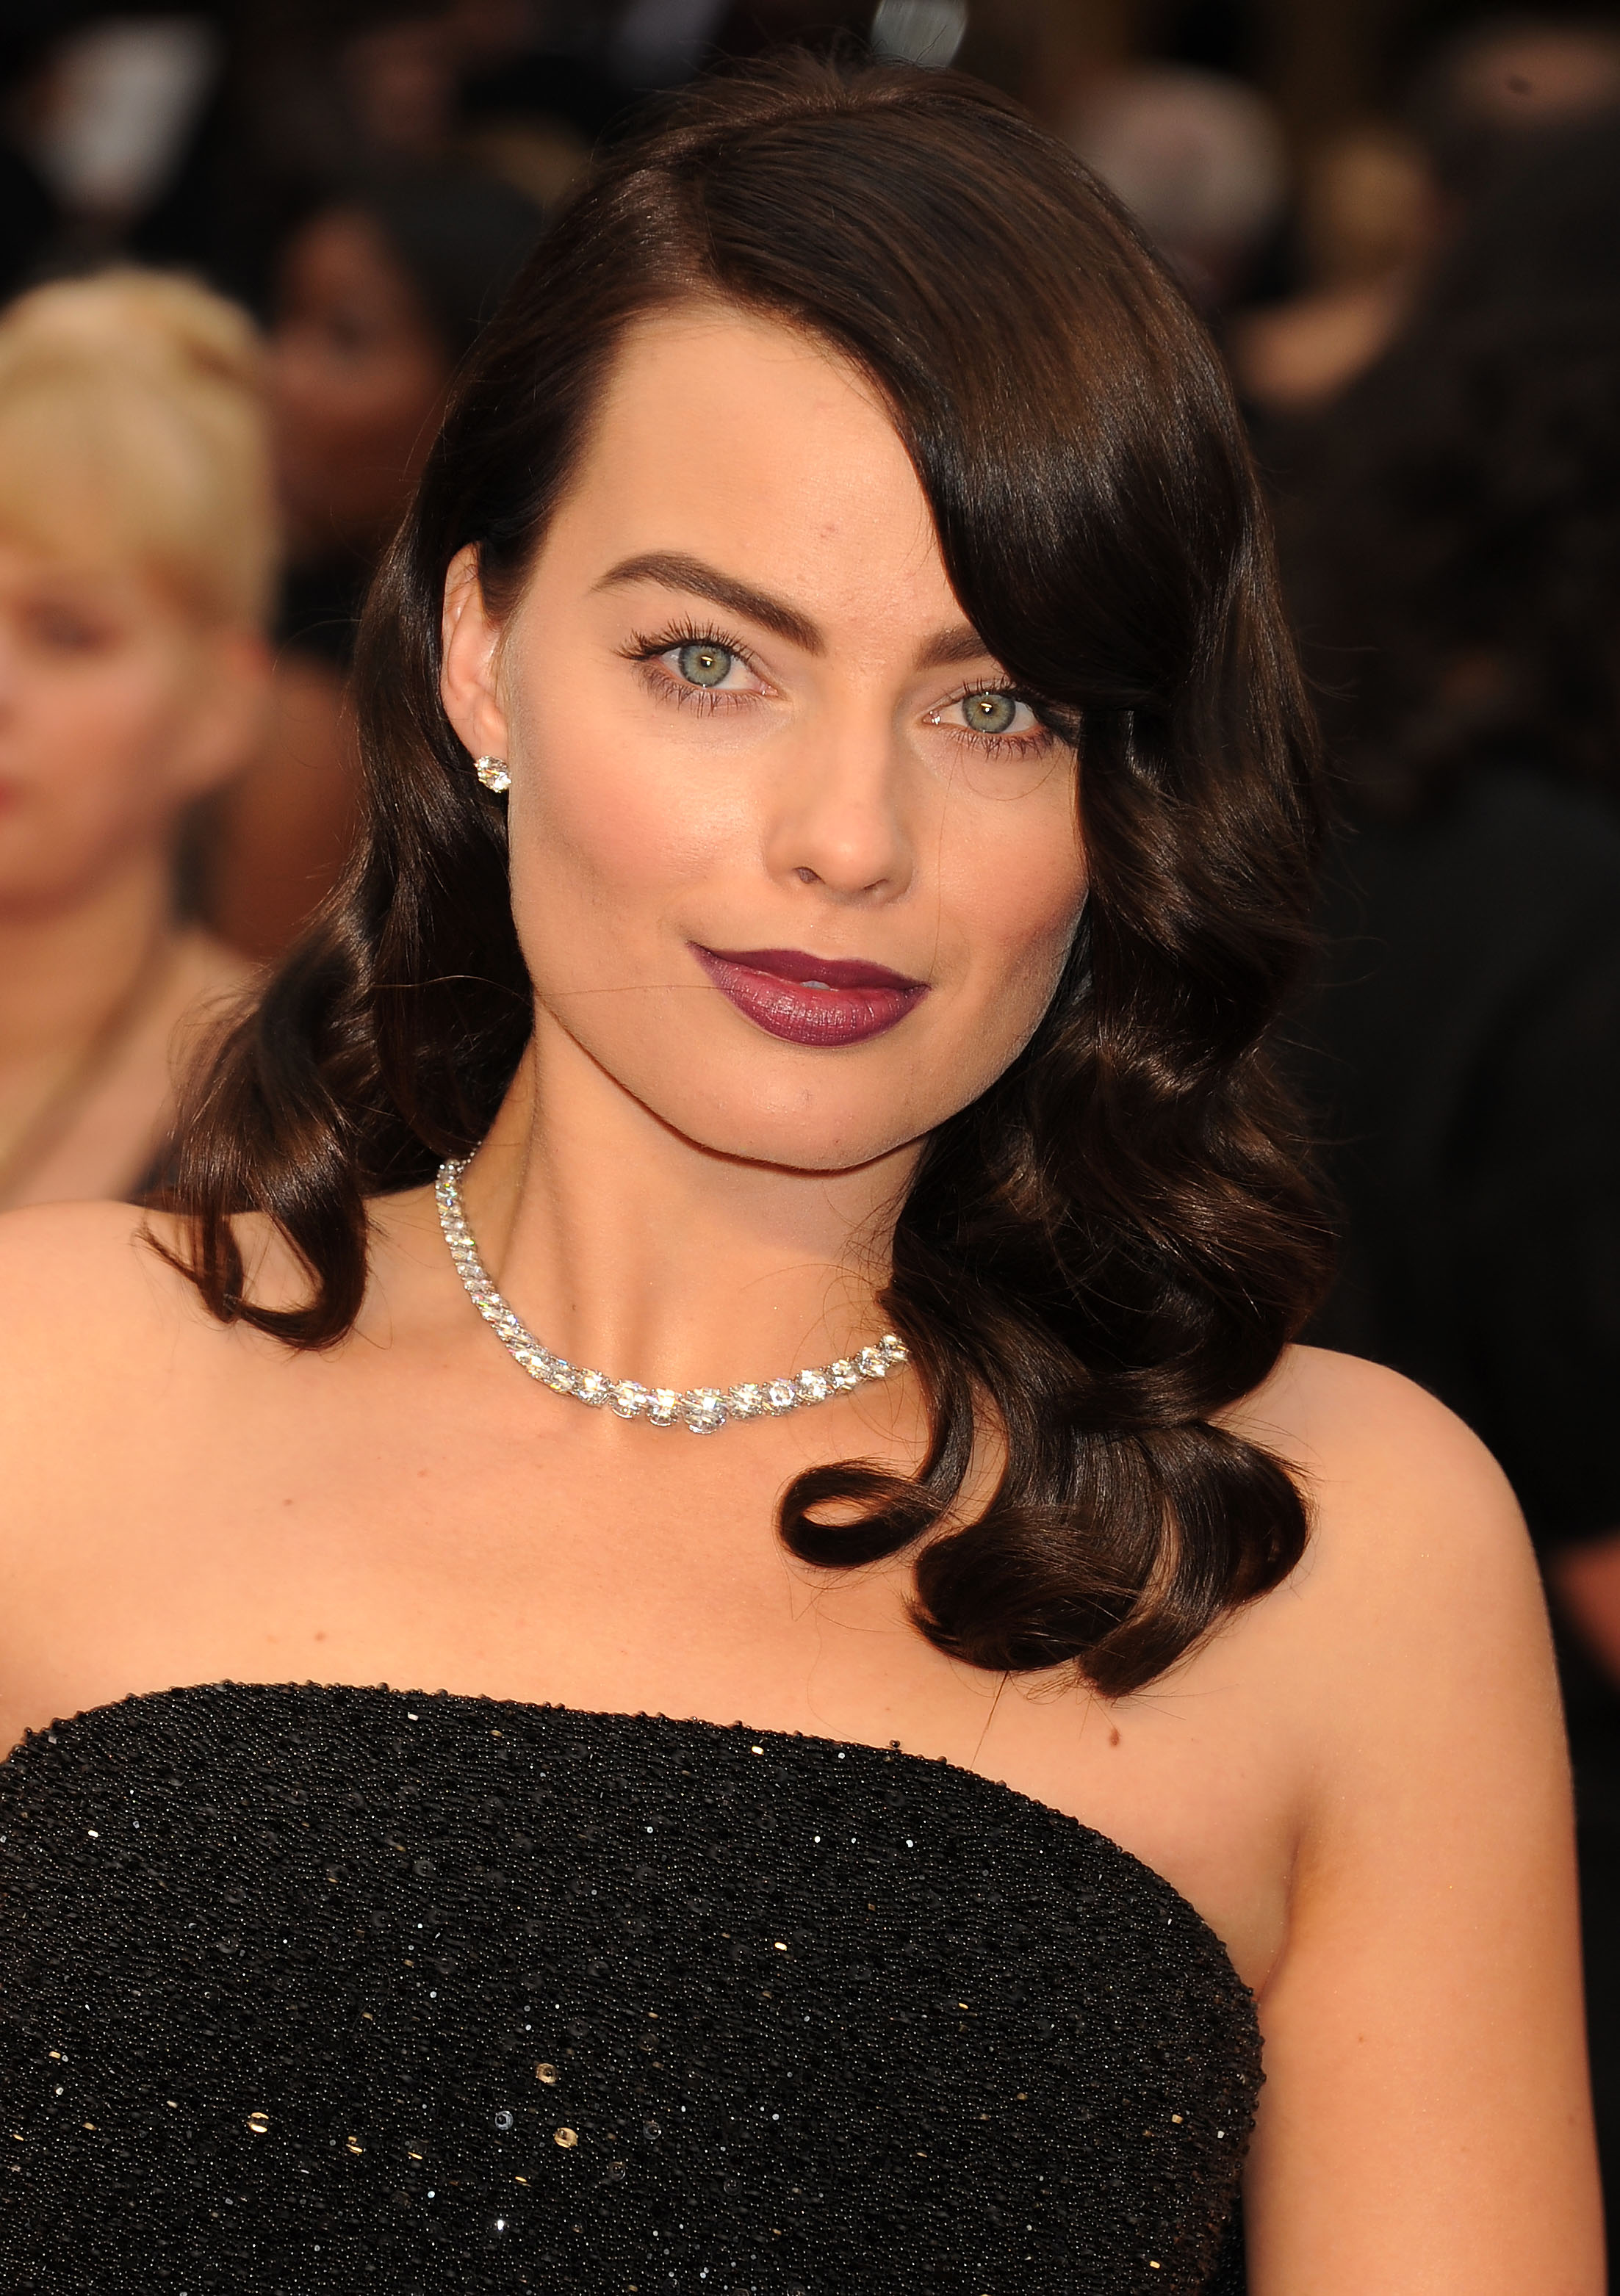 Margot Robbie at the 86th Annual Academy Awards in Hollywood, California on March 2, 2014 | Source: Getty Images